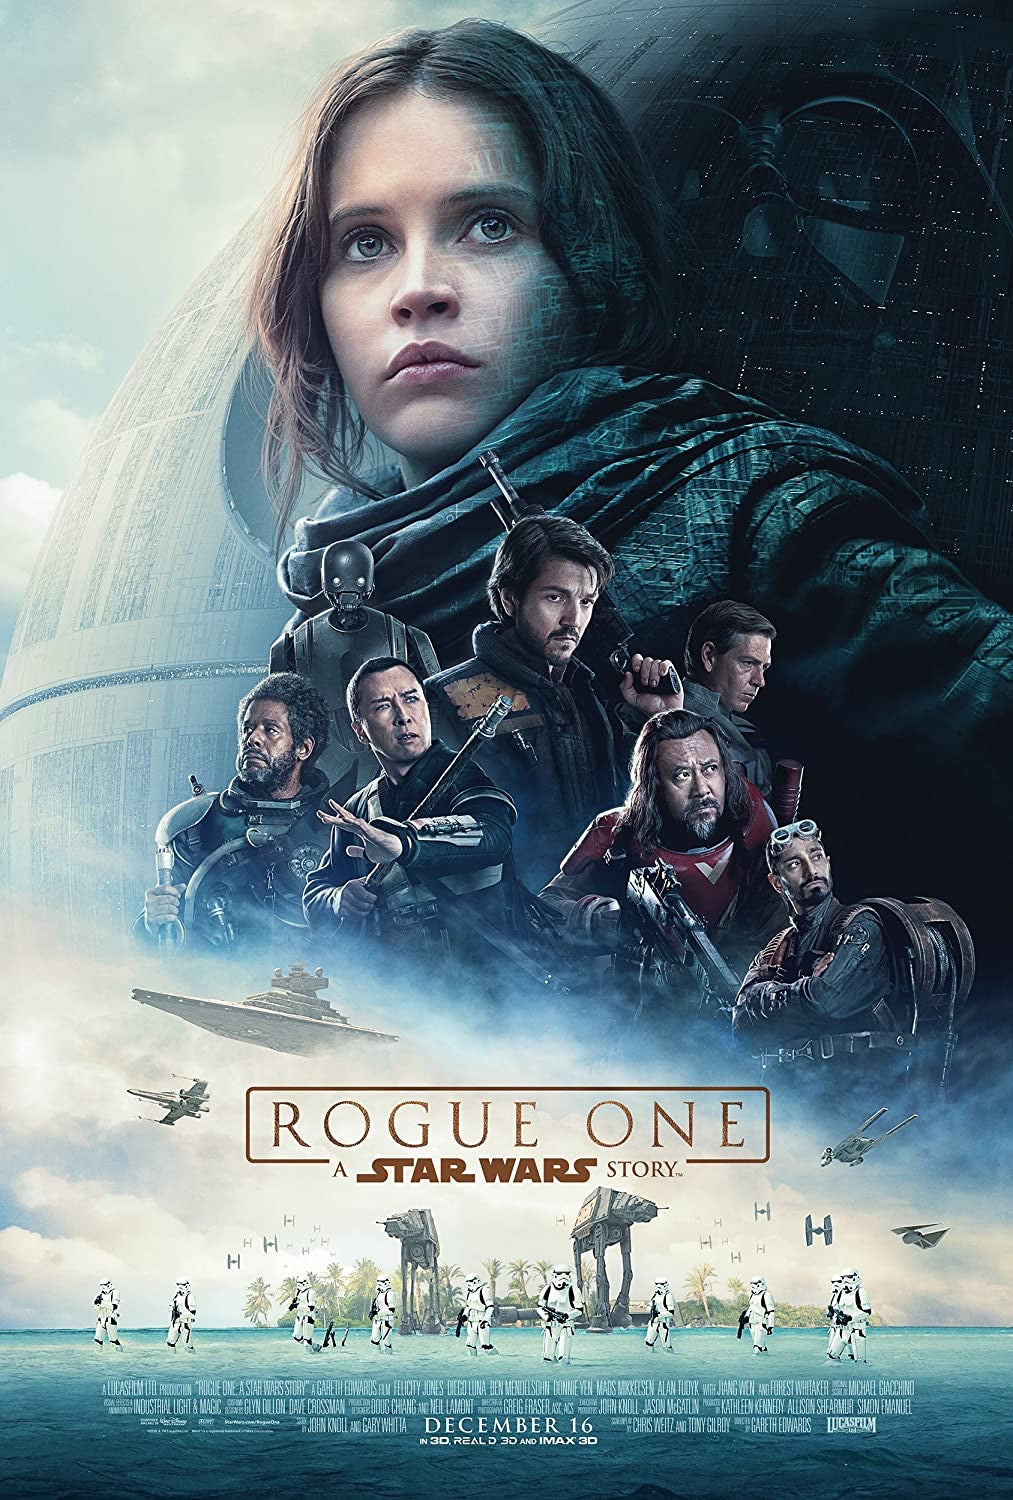 Rogue One: A Star Wars Story (2016) Vudu or Movies Anywhere HD redemption only